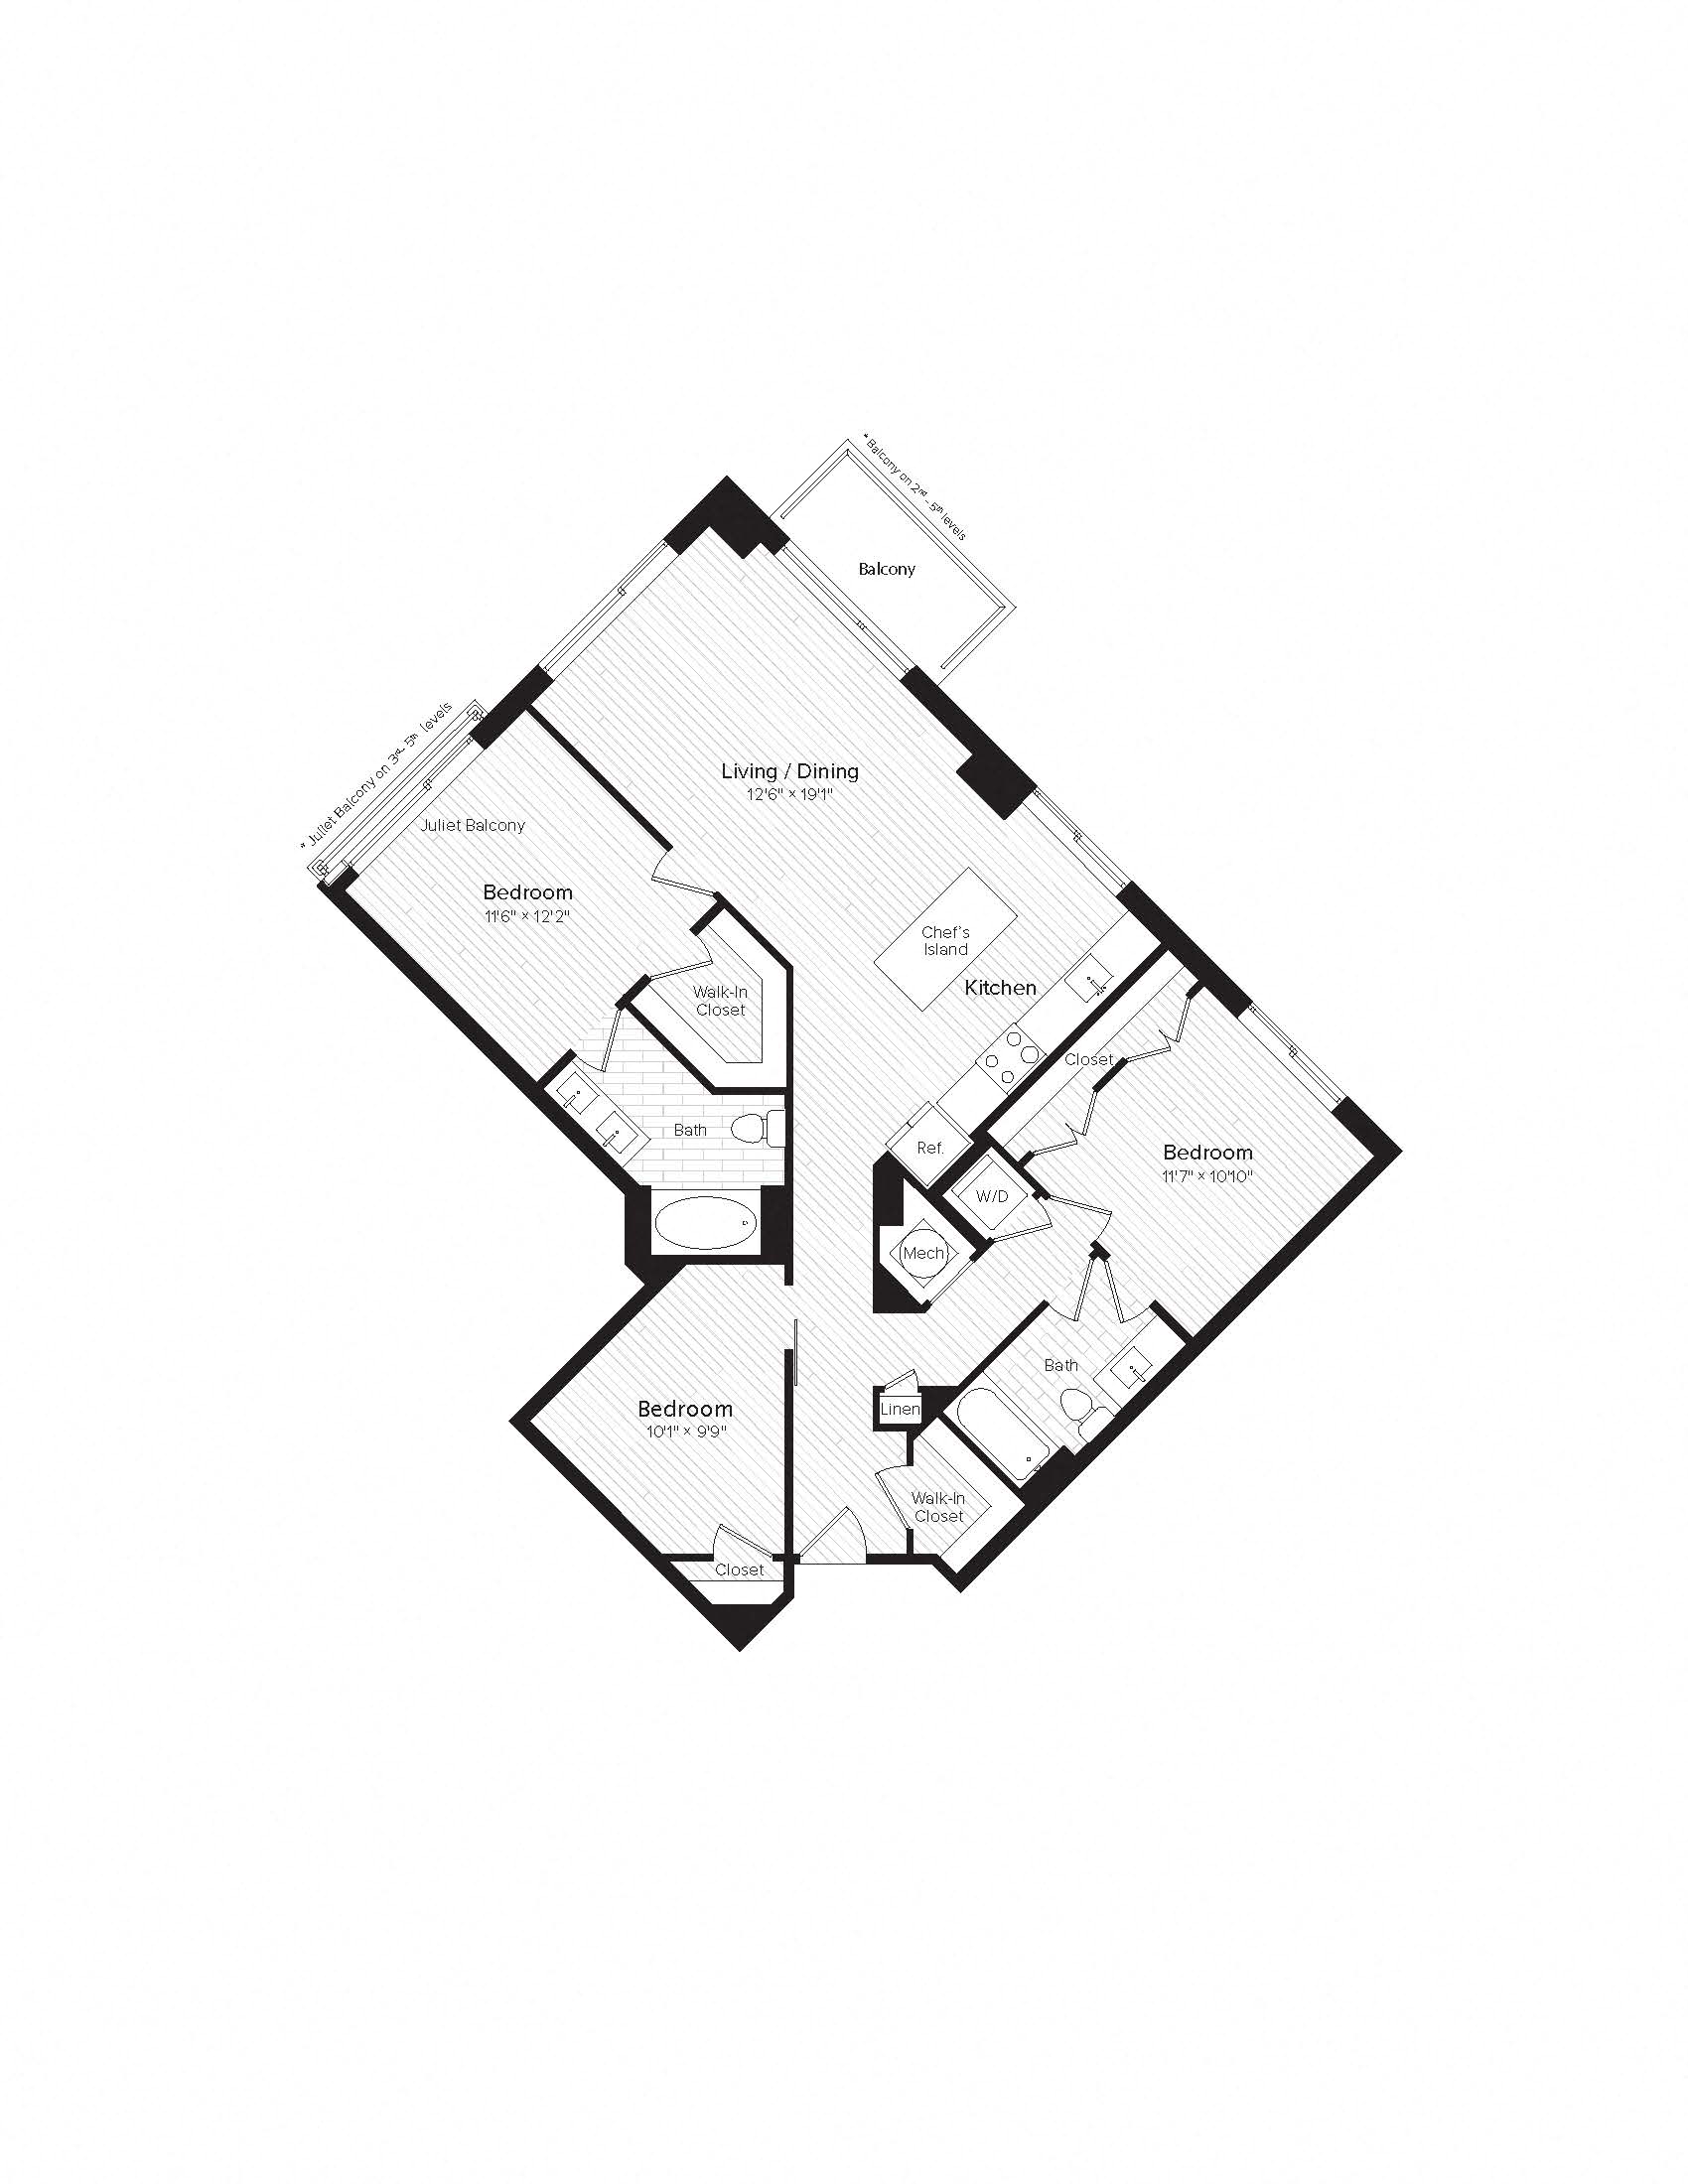 Floor Plans of The Brody in Bethesda, MD